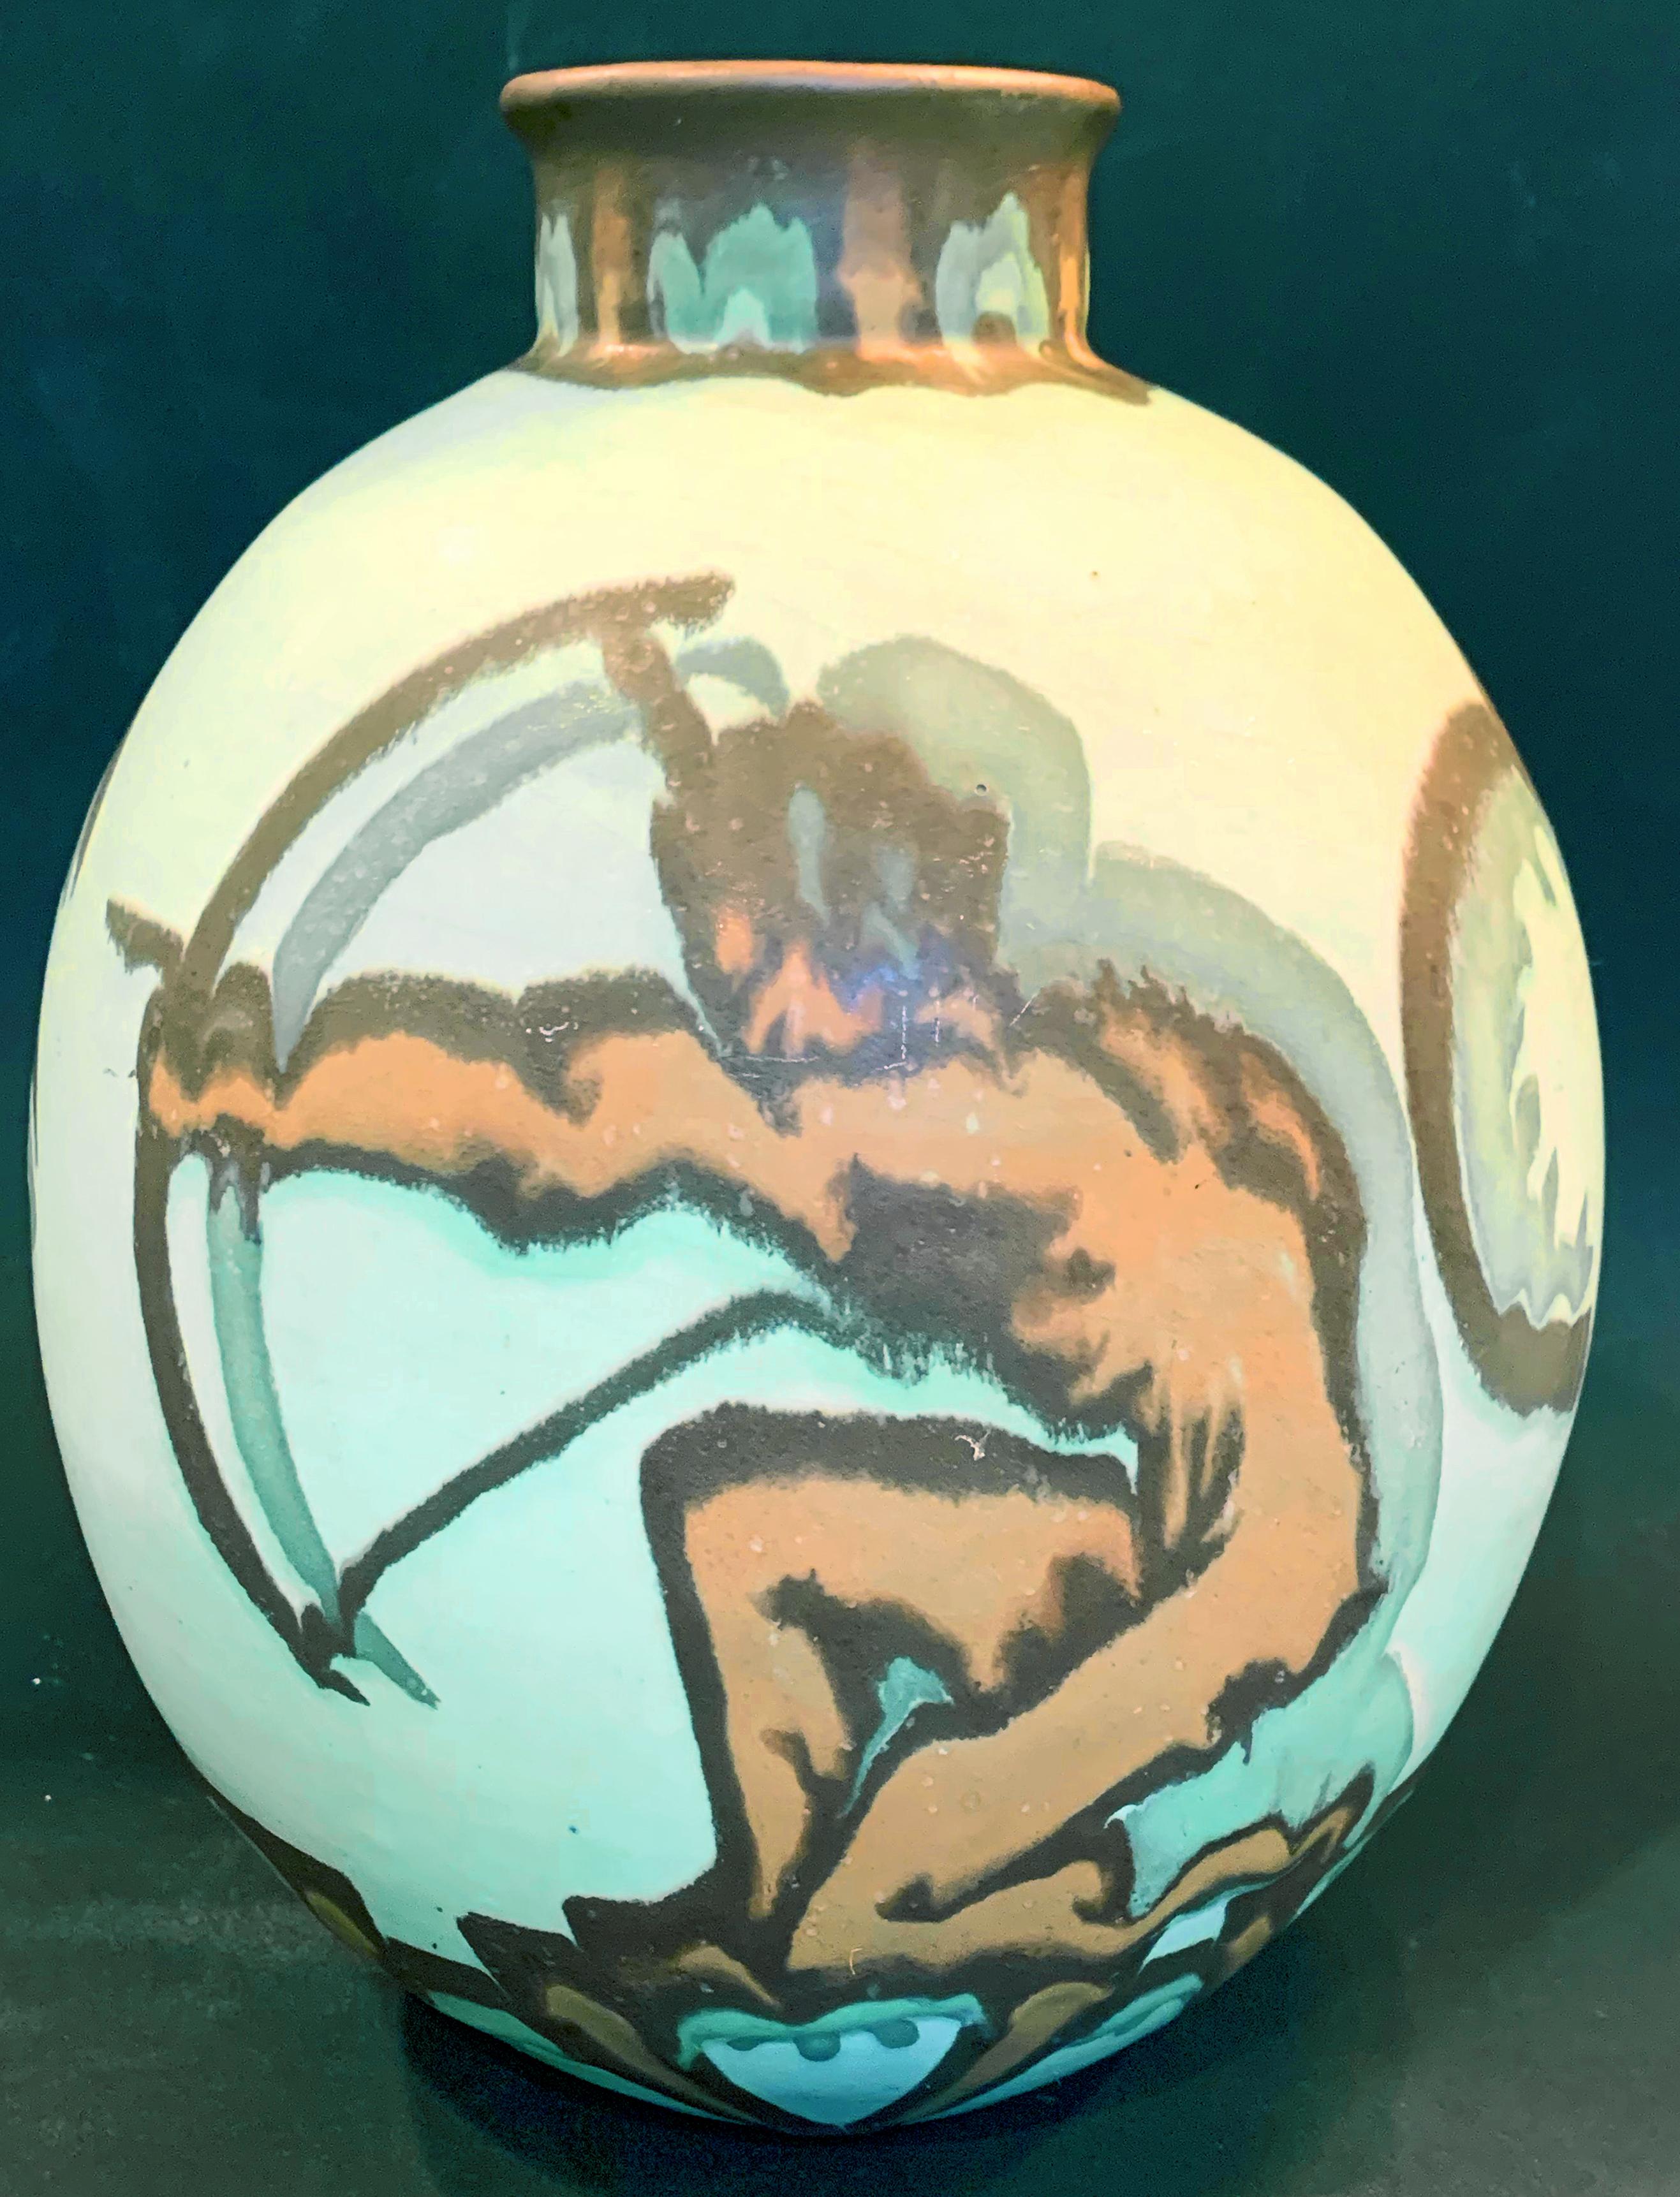 One of the most striking and unusual Art Deco pieces we have offered, this large, ovoid-shaped vase depicts a nude male Archer in tones of ruddy brown and black on a glowing sea foam green ground. The figure is painted with a heavy, dark outline